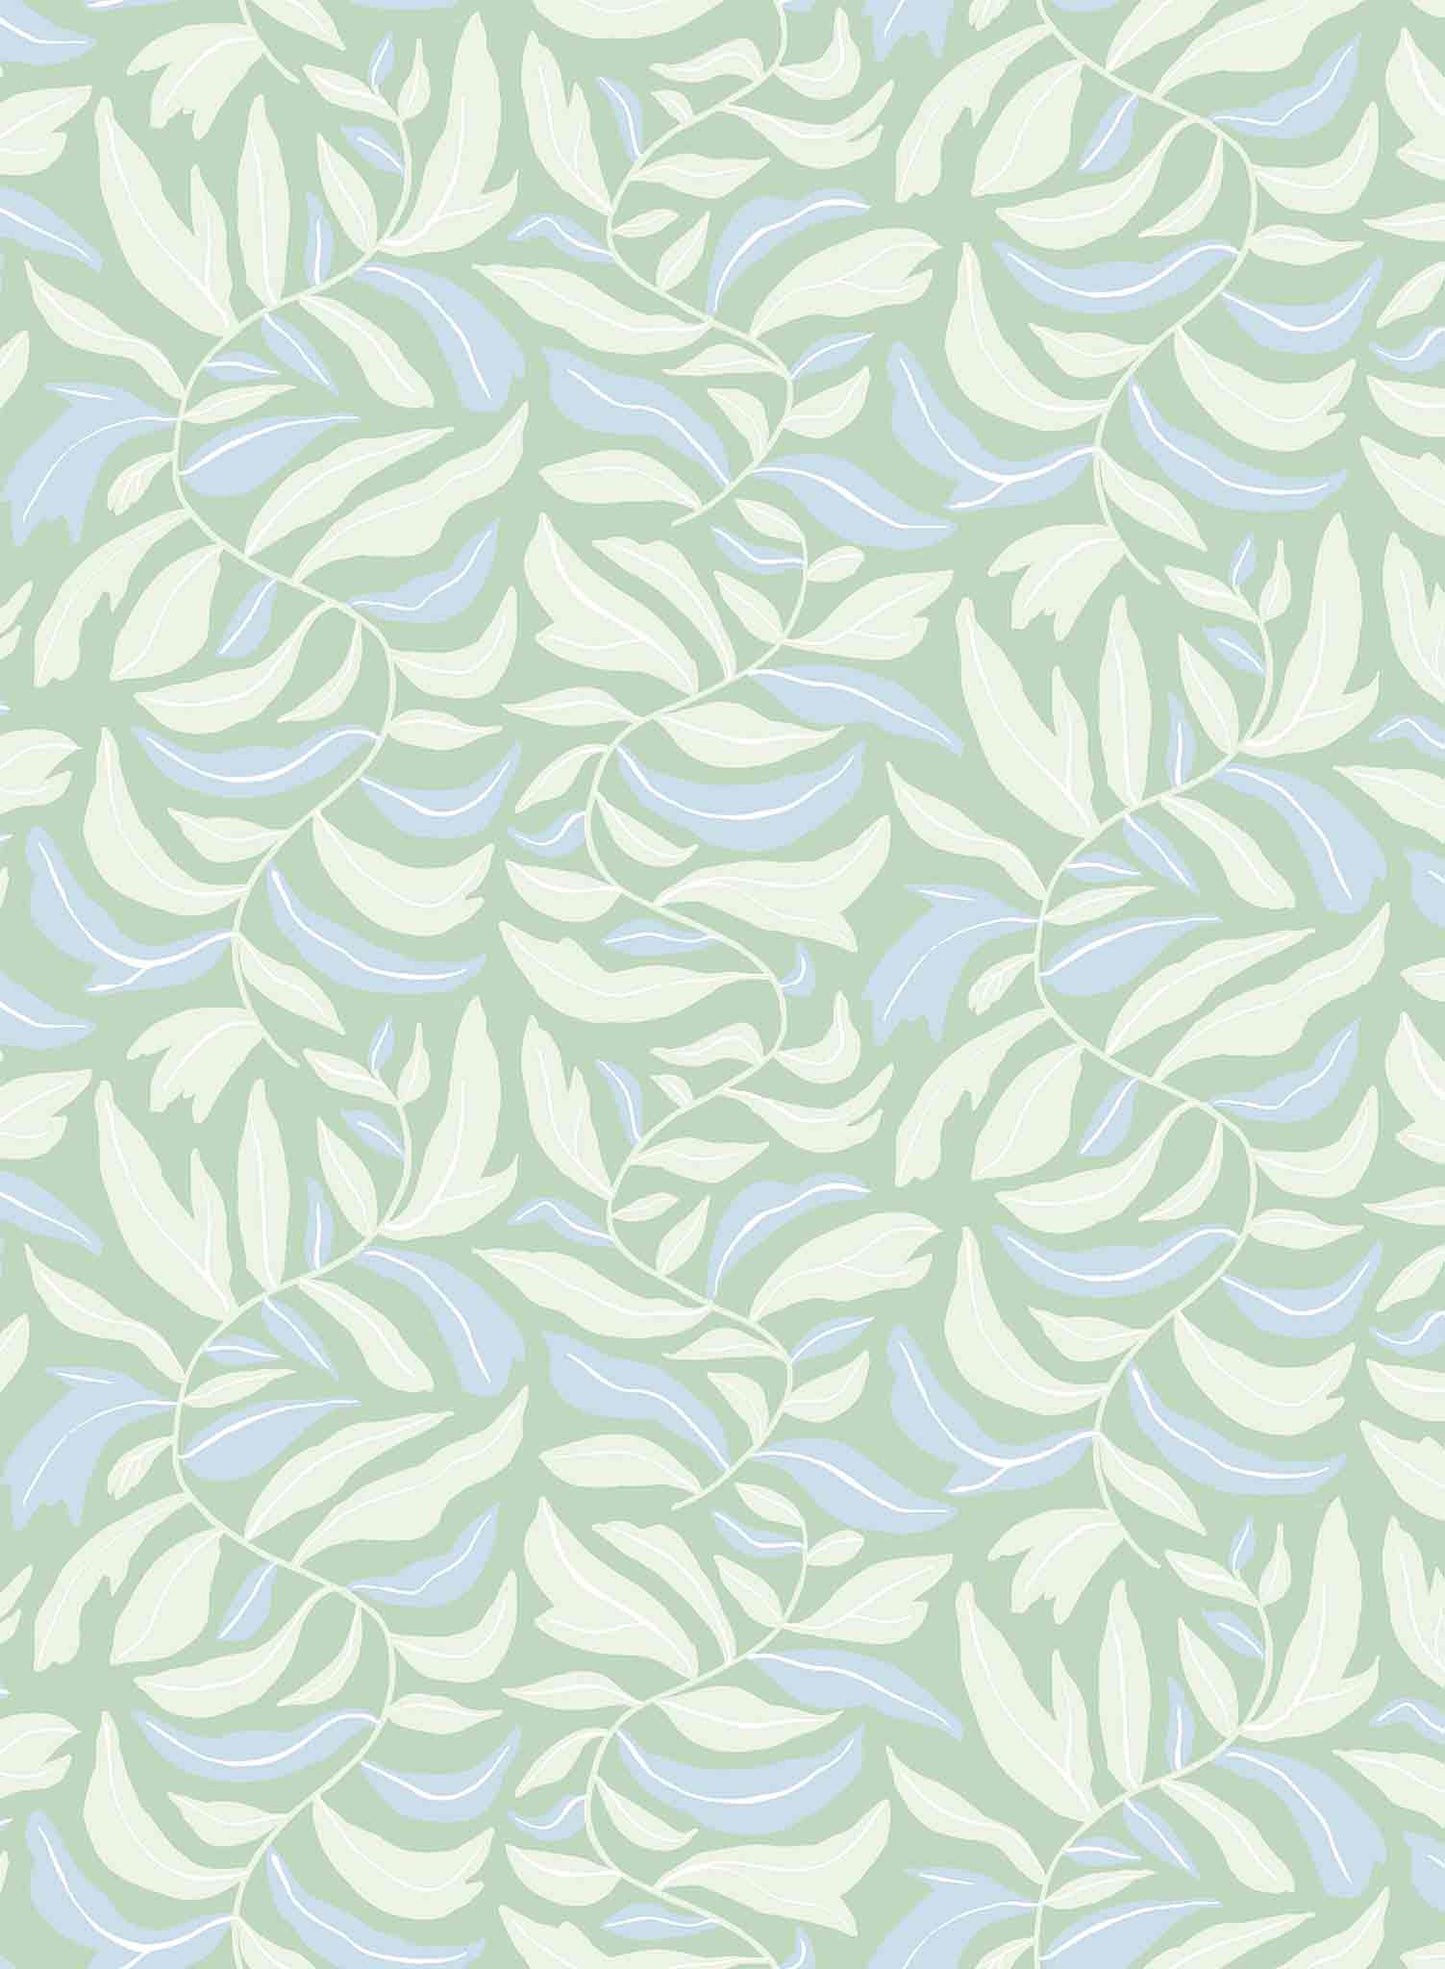 Spring Garland is a minimalist wallpaper by Opposite Wall of squiggly branches with leaves.